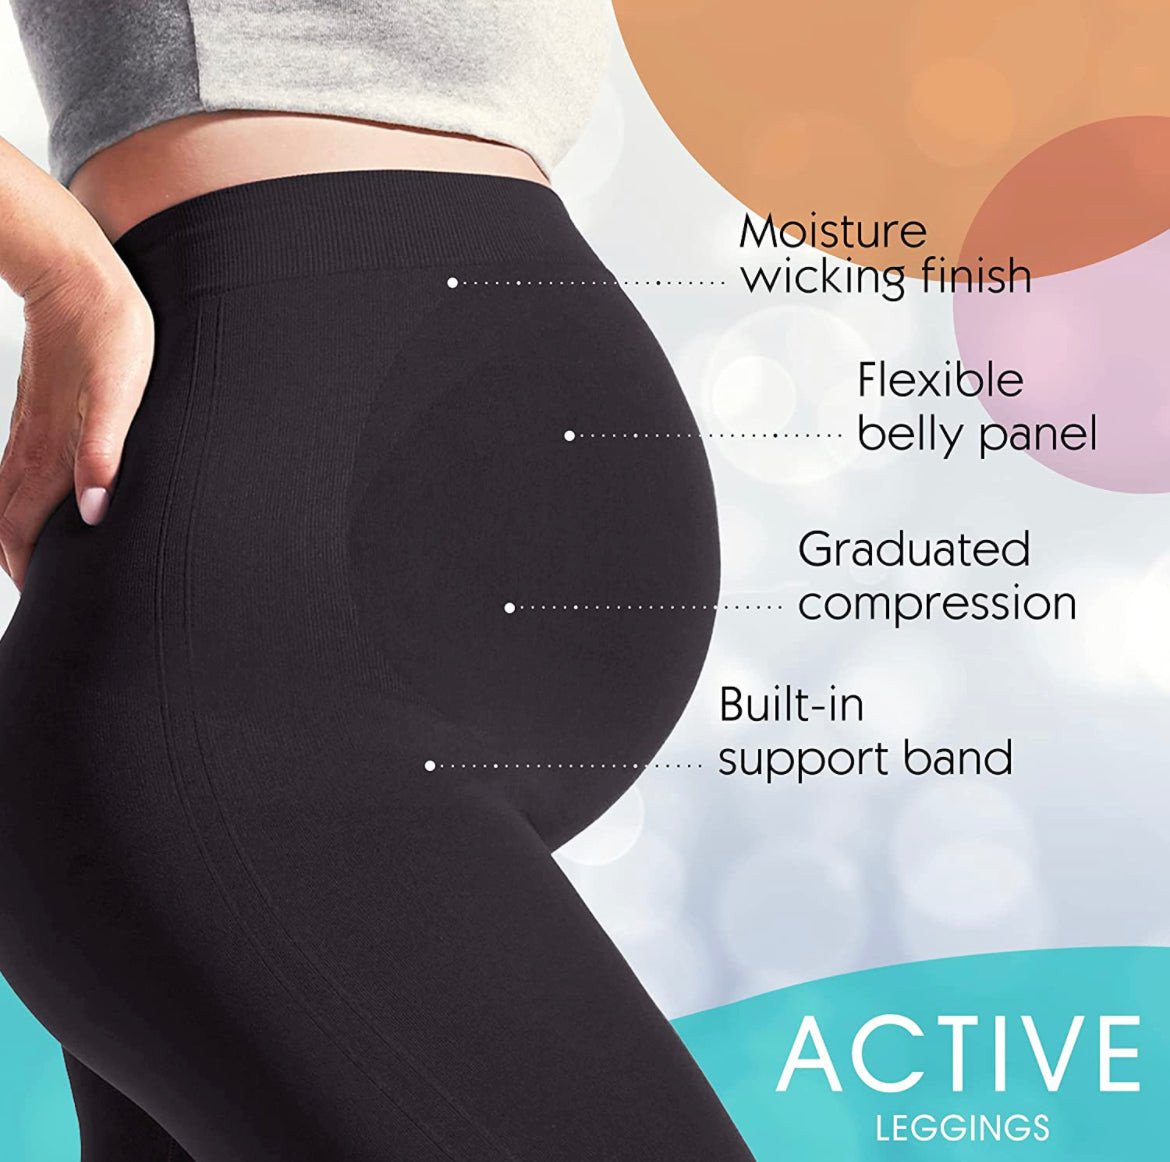 Maternity Leggings Active Wear Over The Bump Pants Pregnancy Shaping Over The Belly Postpartum Breastfeeding.